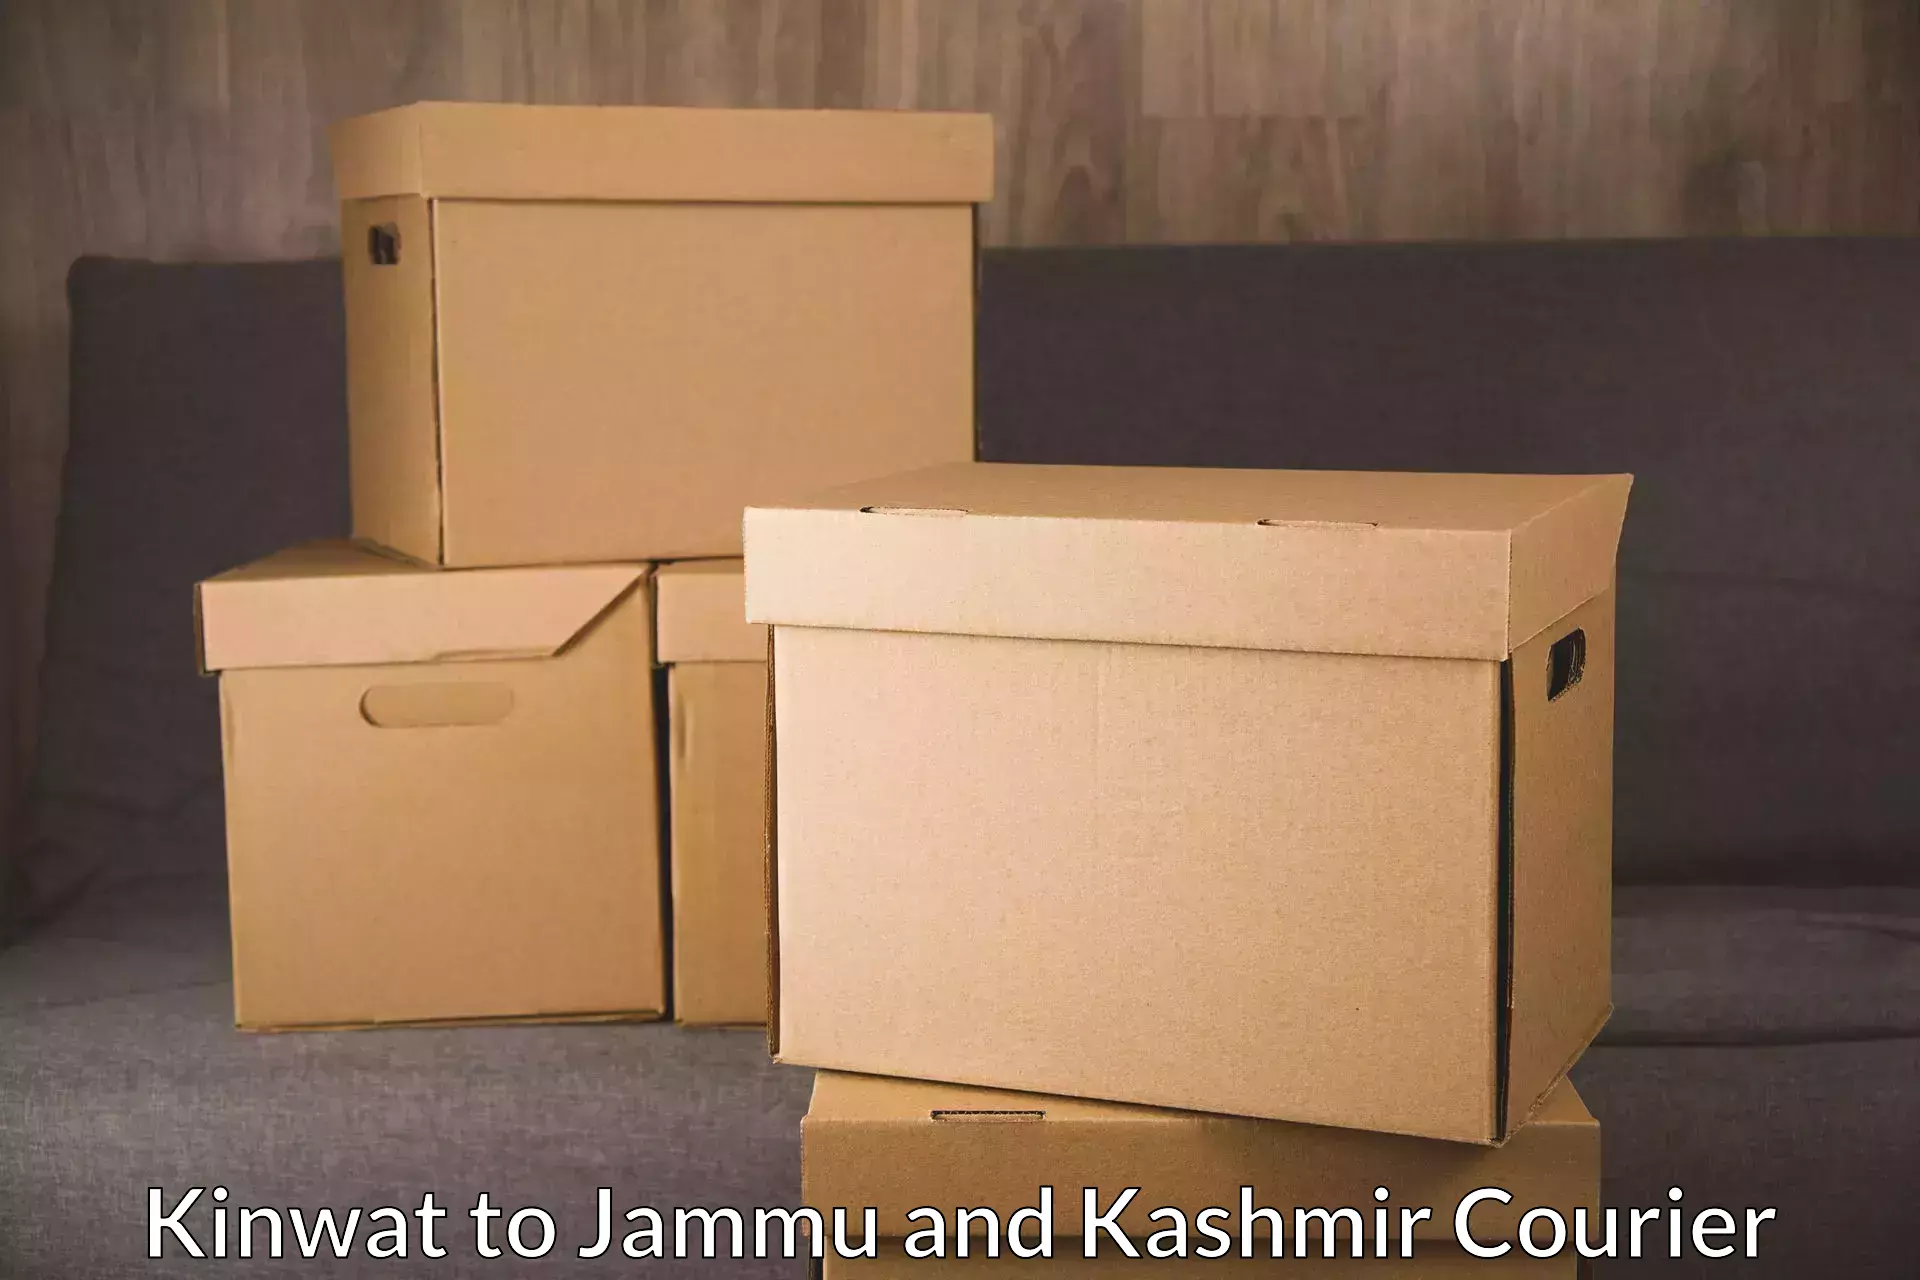 Round-the-clock parcel delivery Kinwat to Kargil